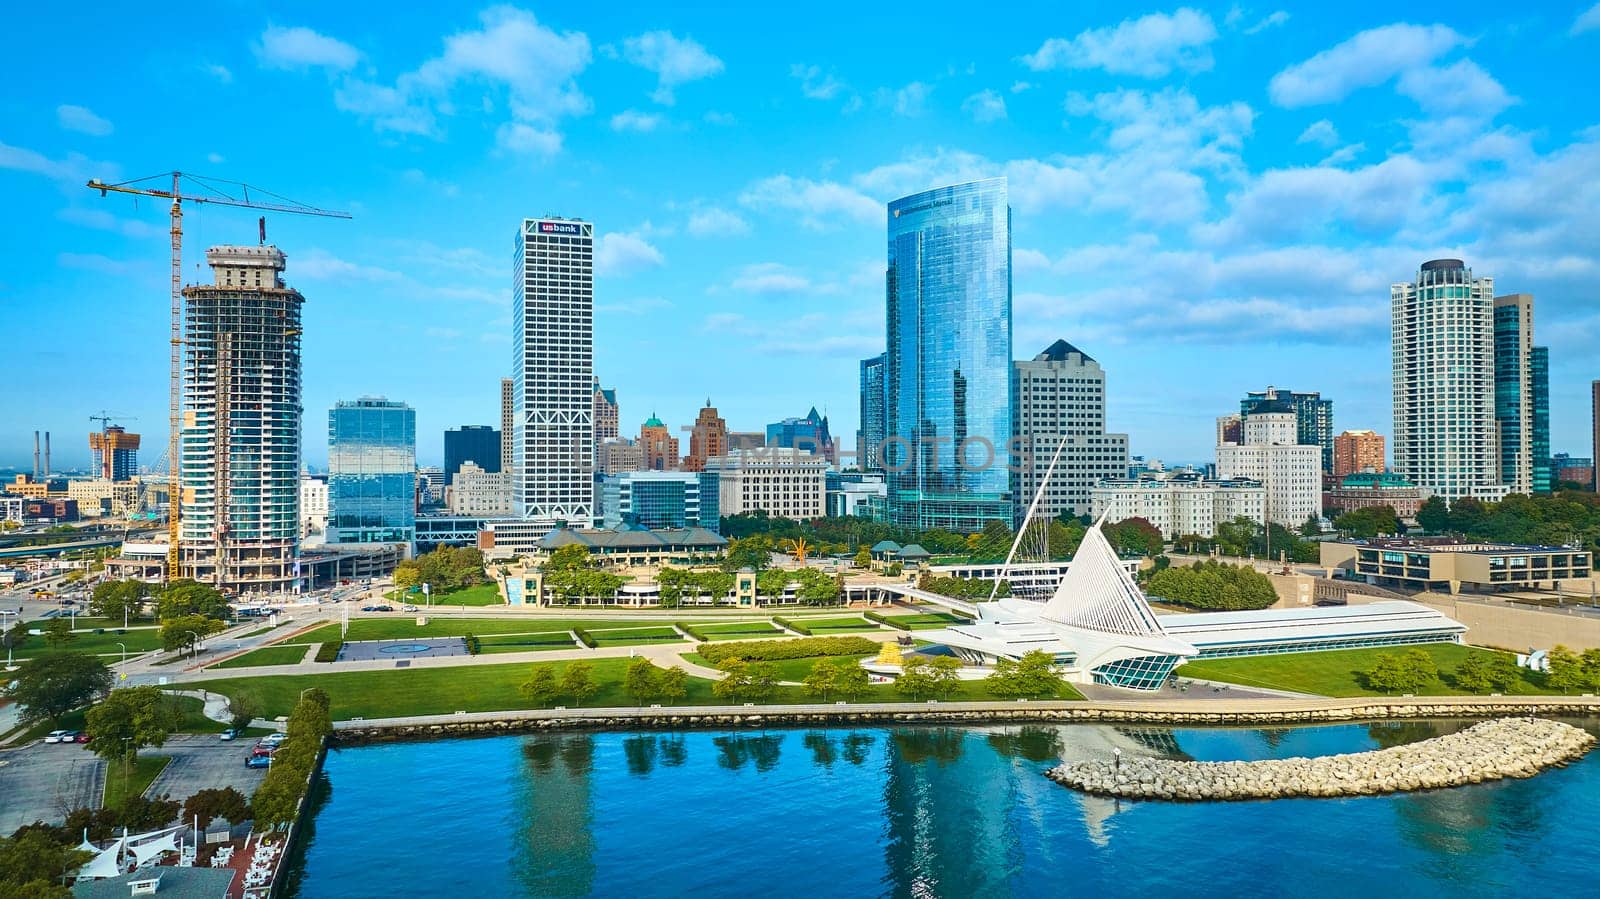 Aerial View of Milwaukee Skyline, Art Museum, and Construction by njproductions